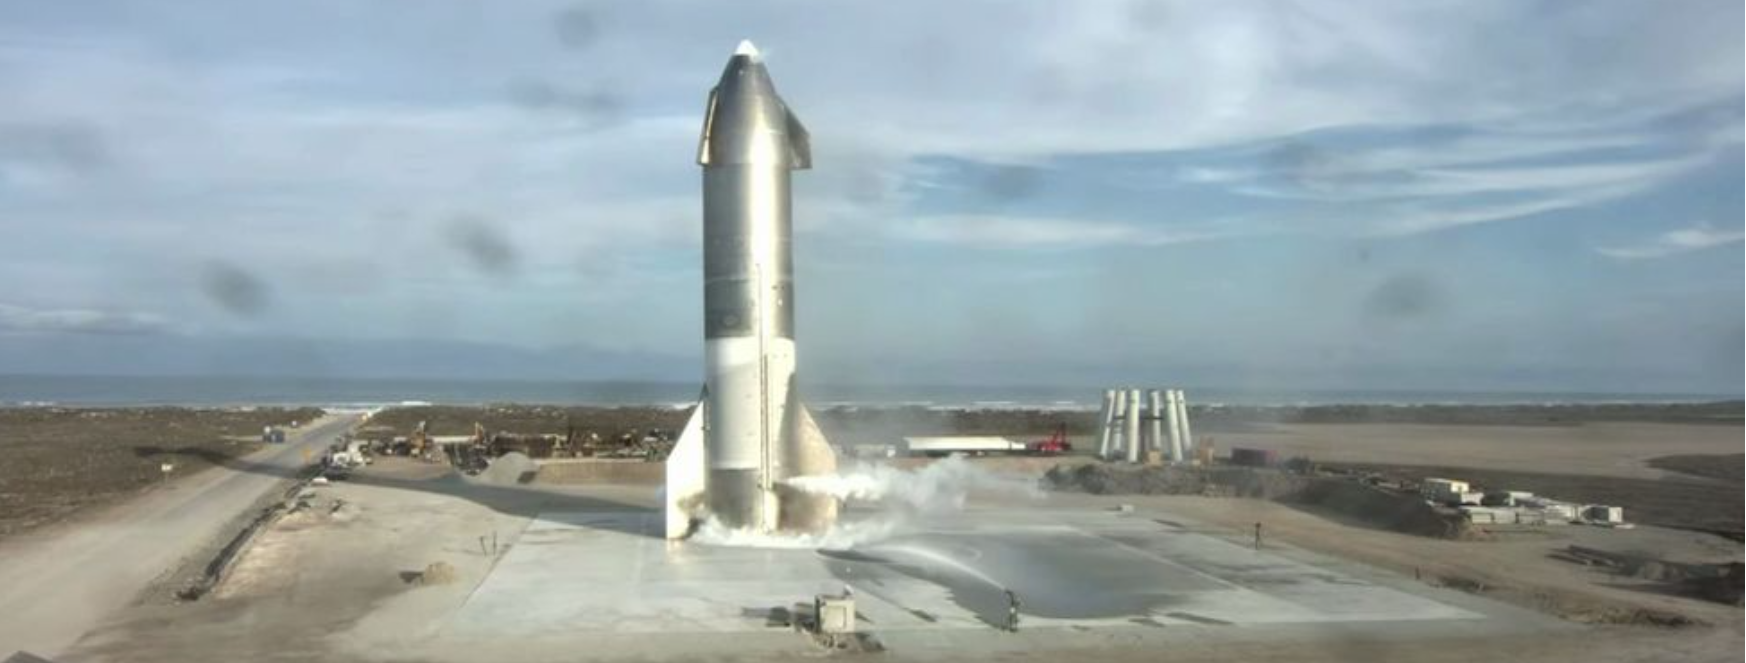 Space X's vehicle leans over the pad moments later it blew up.